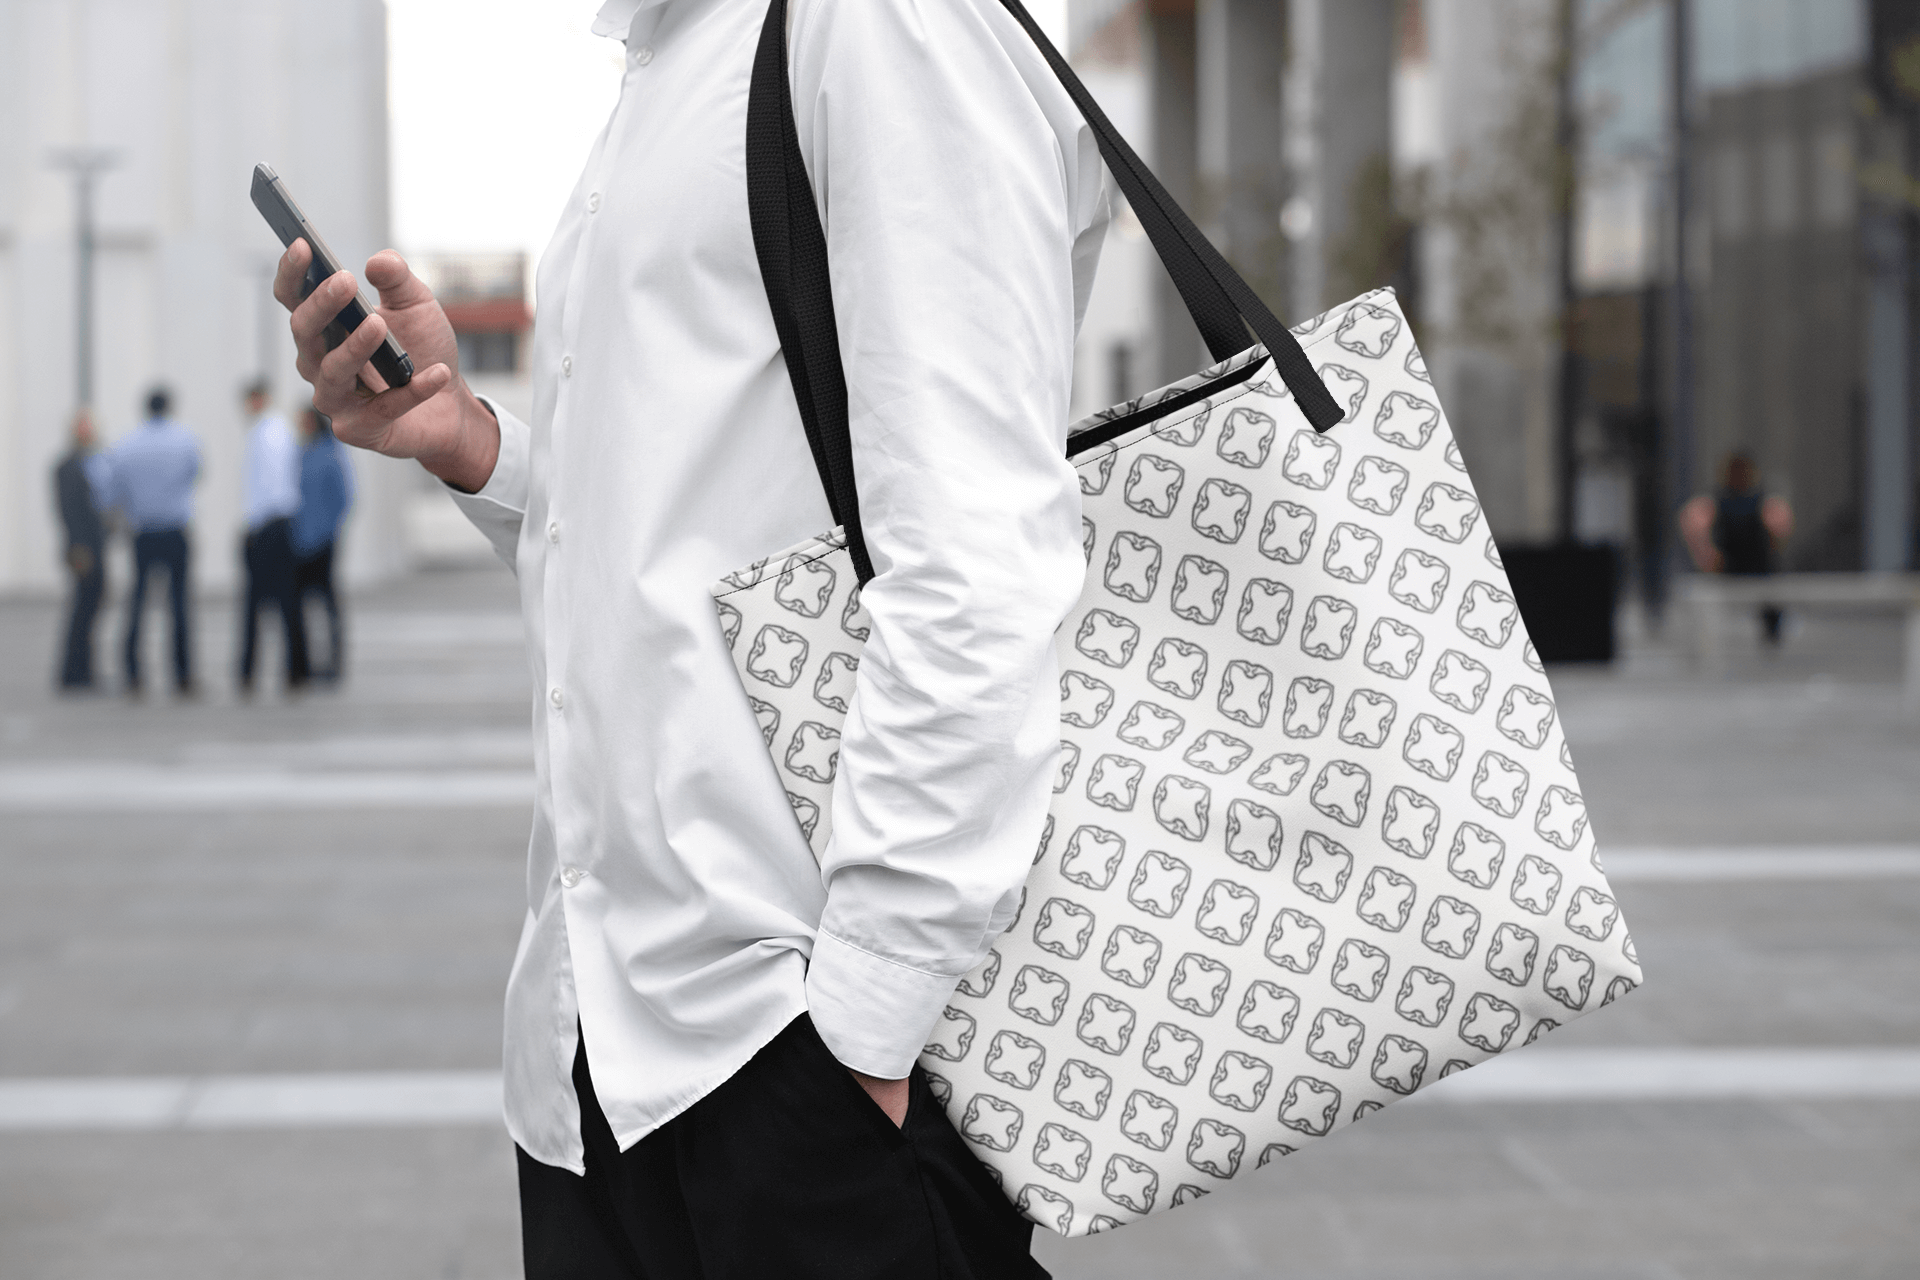 Anderson Patterned Tote Shopper Bag Bags - Shopping bags A Moment Of Now Women’s Boutique Clothing Online Lifestyle Store